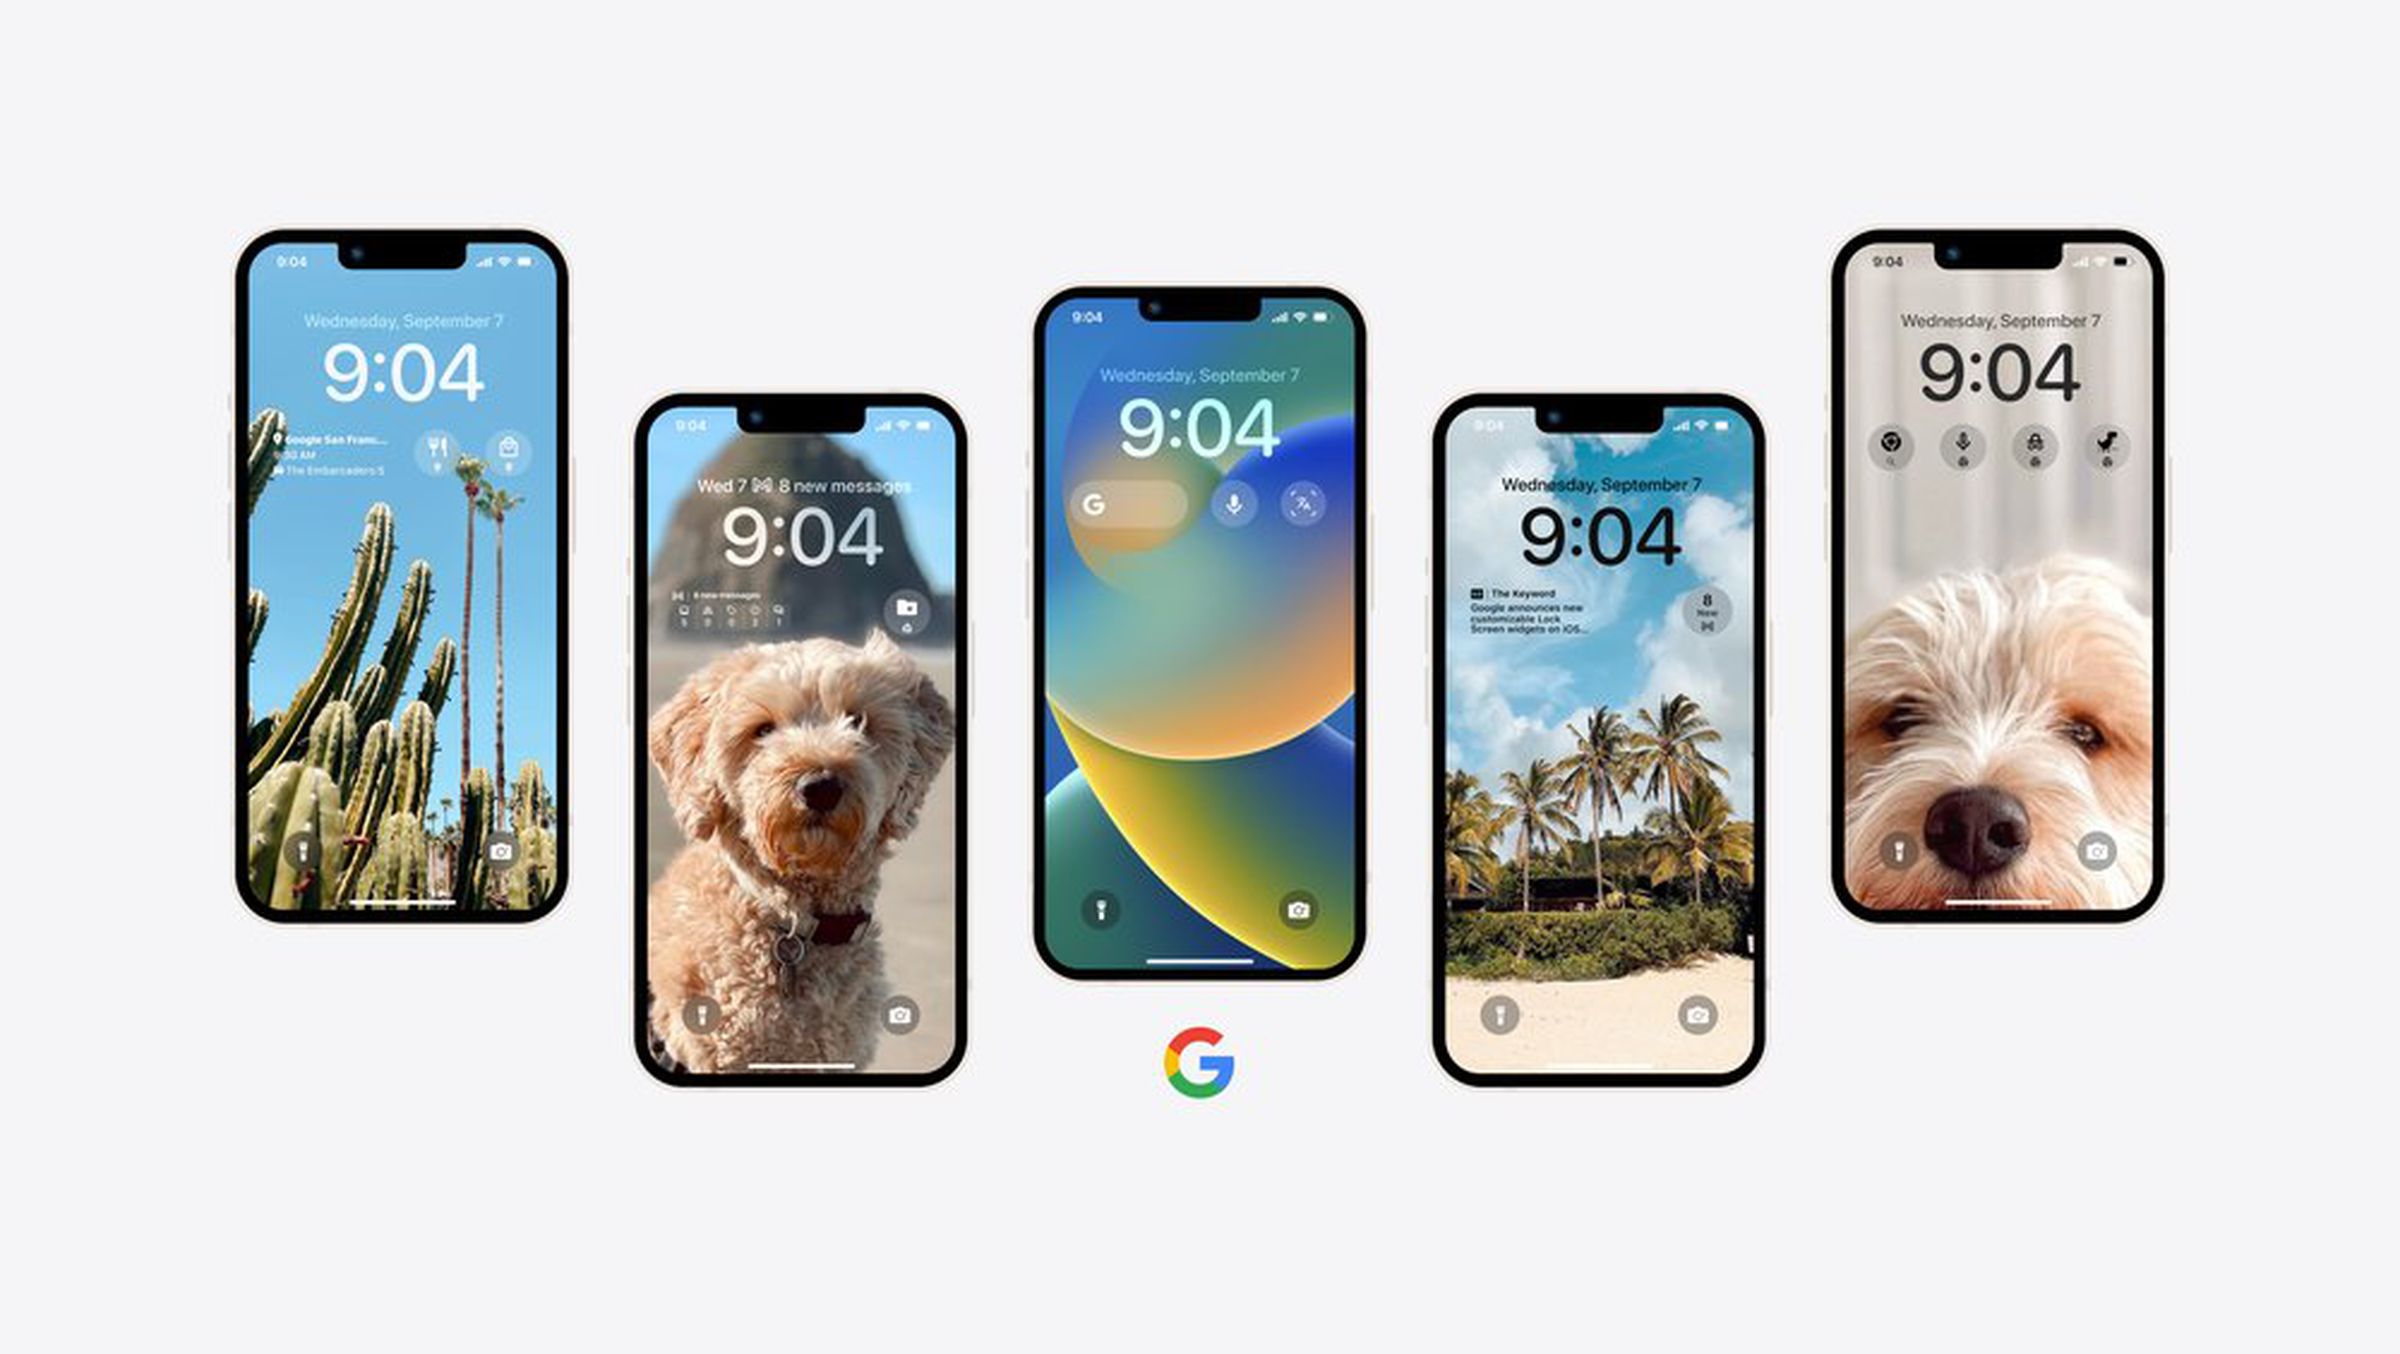 Lockscreen widgets for several Google apps shown on four iPhone screens